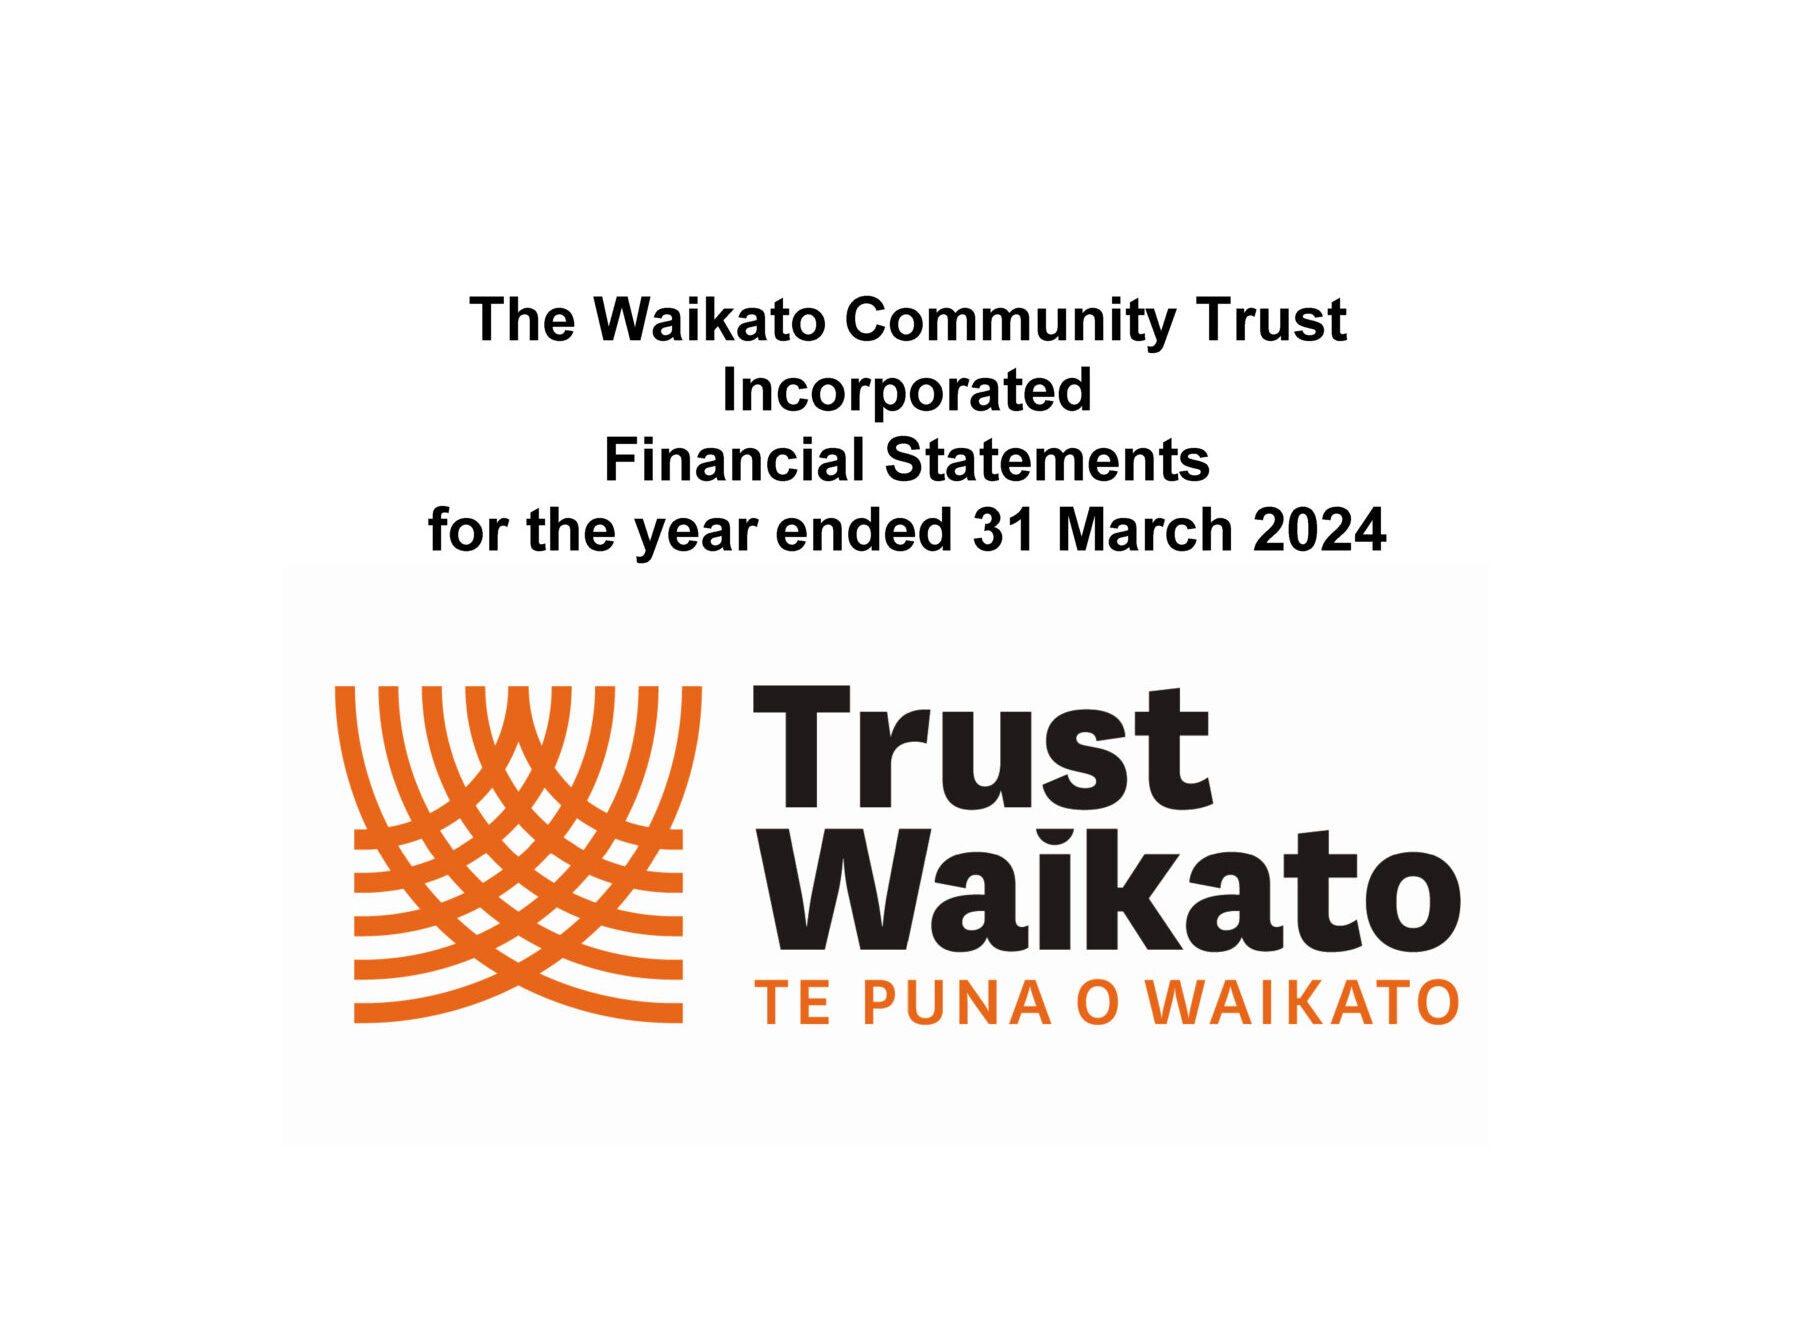 The Waikato Community Trust Incorporated Financial Statements for the year ended 31 March 2024